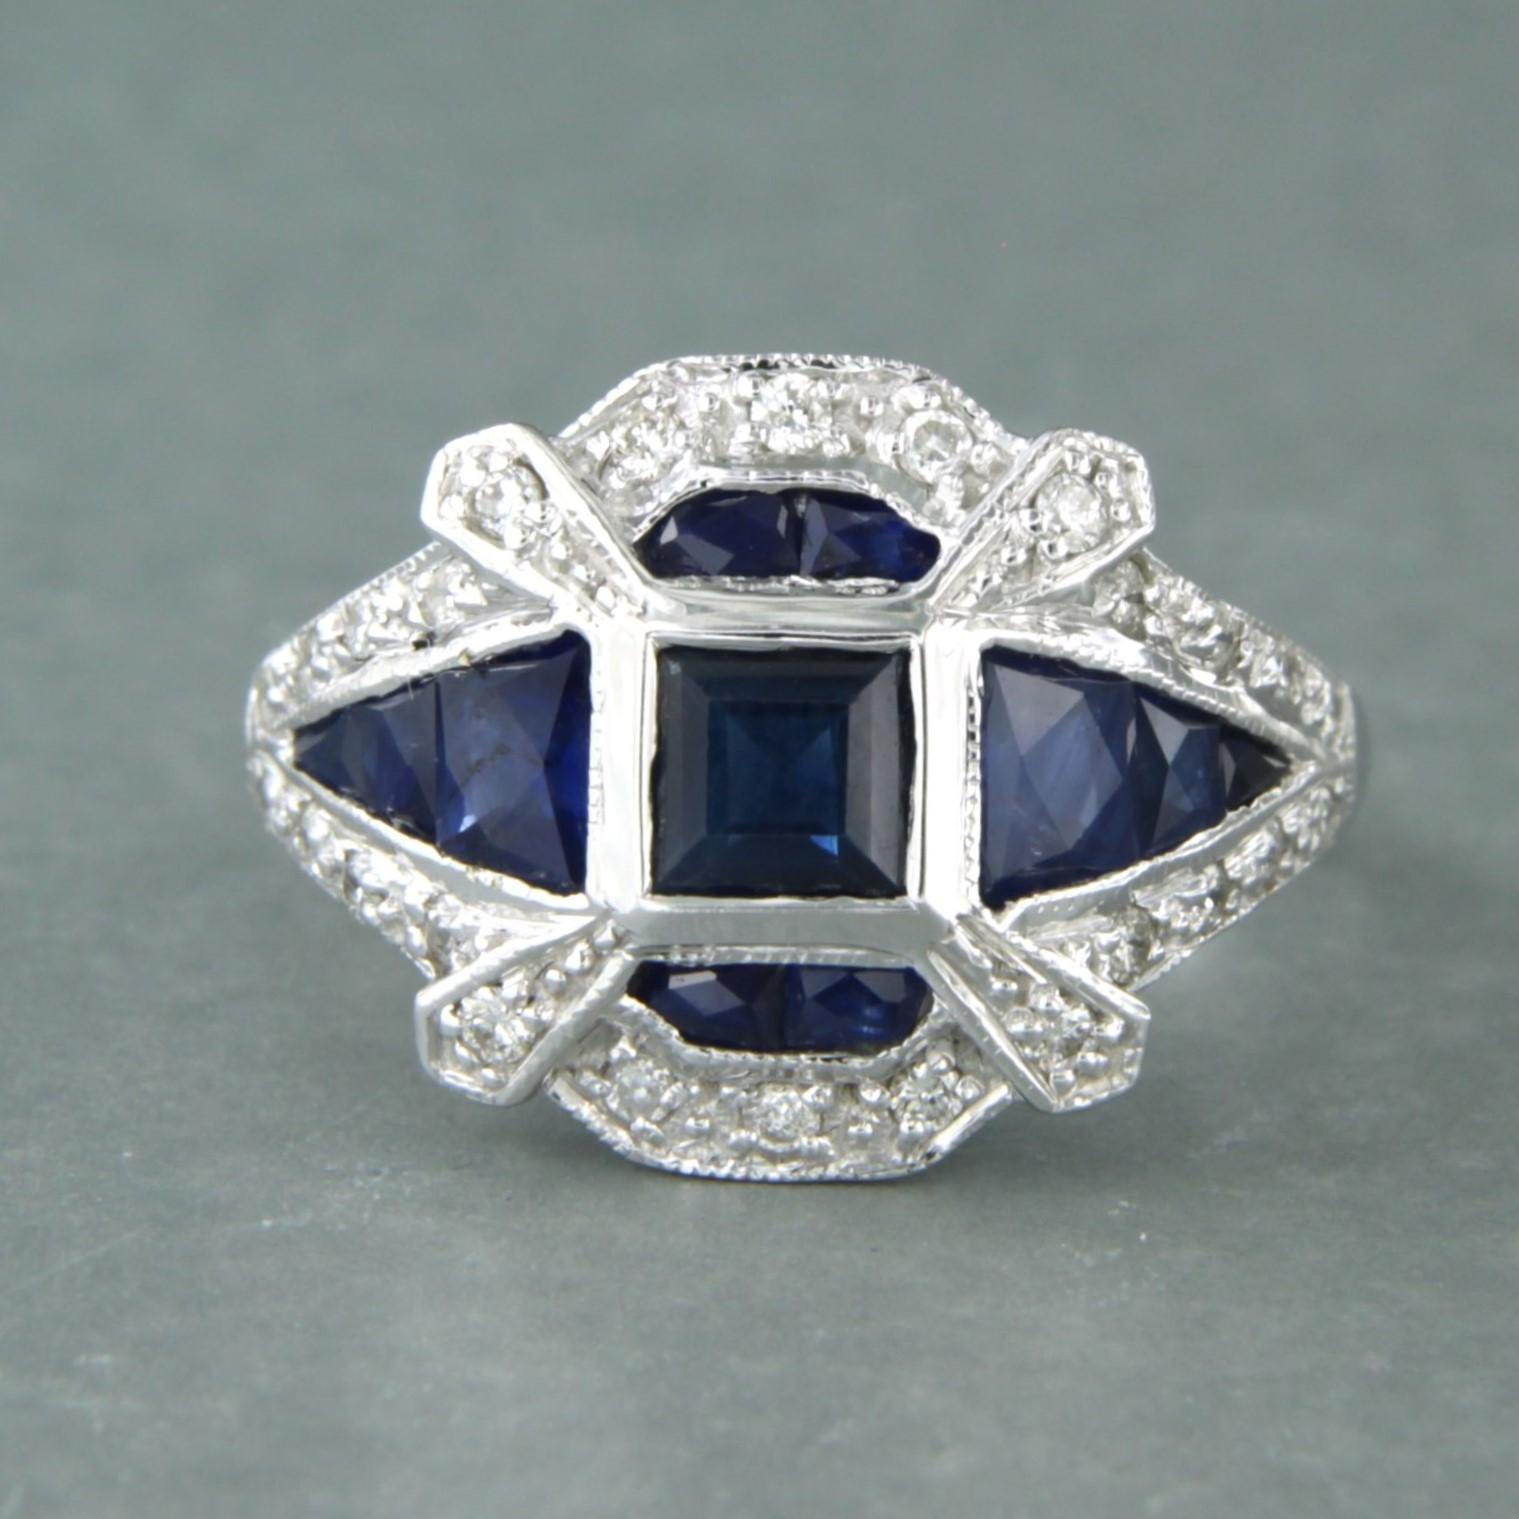 14k white gold ring set with sapphire and brilliant cut diamond 0.26 ct - F/G - SV/SI - ring size U.S. 6.75 - 17.25(54)

detailed description:

the top of the ring is 1.4 cm wide and 5.4 mm high

ring size U.S. 6.75 - 17.25(54), the ring can be